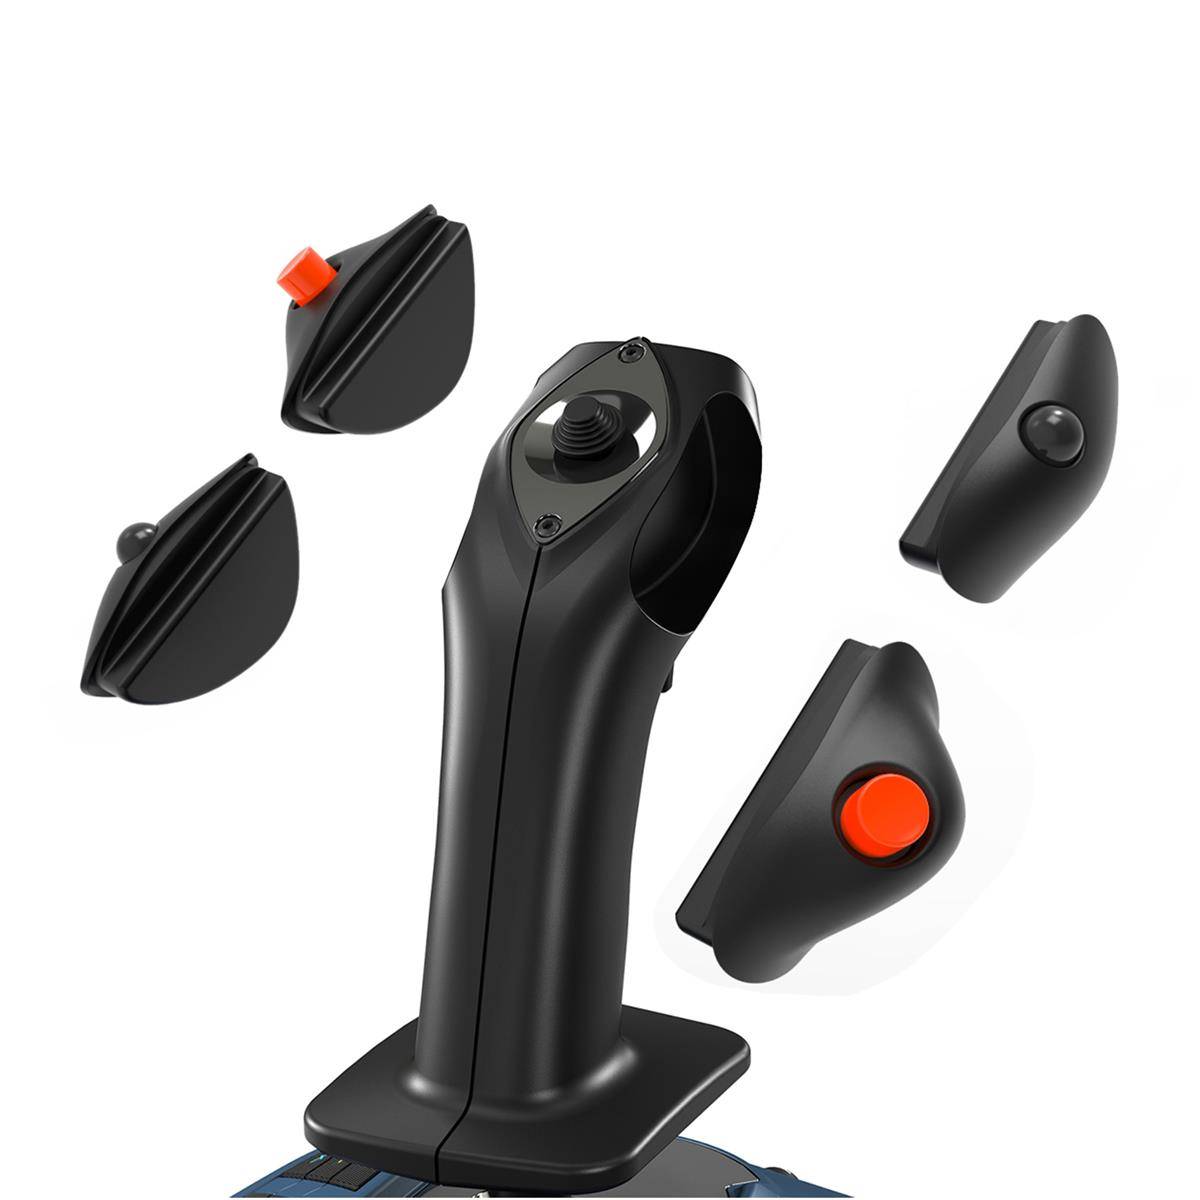 PC X|S, Series and Edition Invastor TCA Thrustmaster Joystick Xbox One Xbox Airbus Sidestick for -